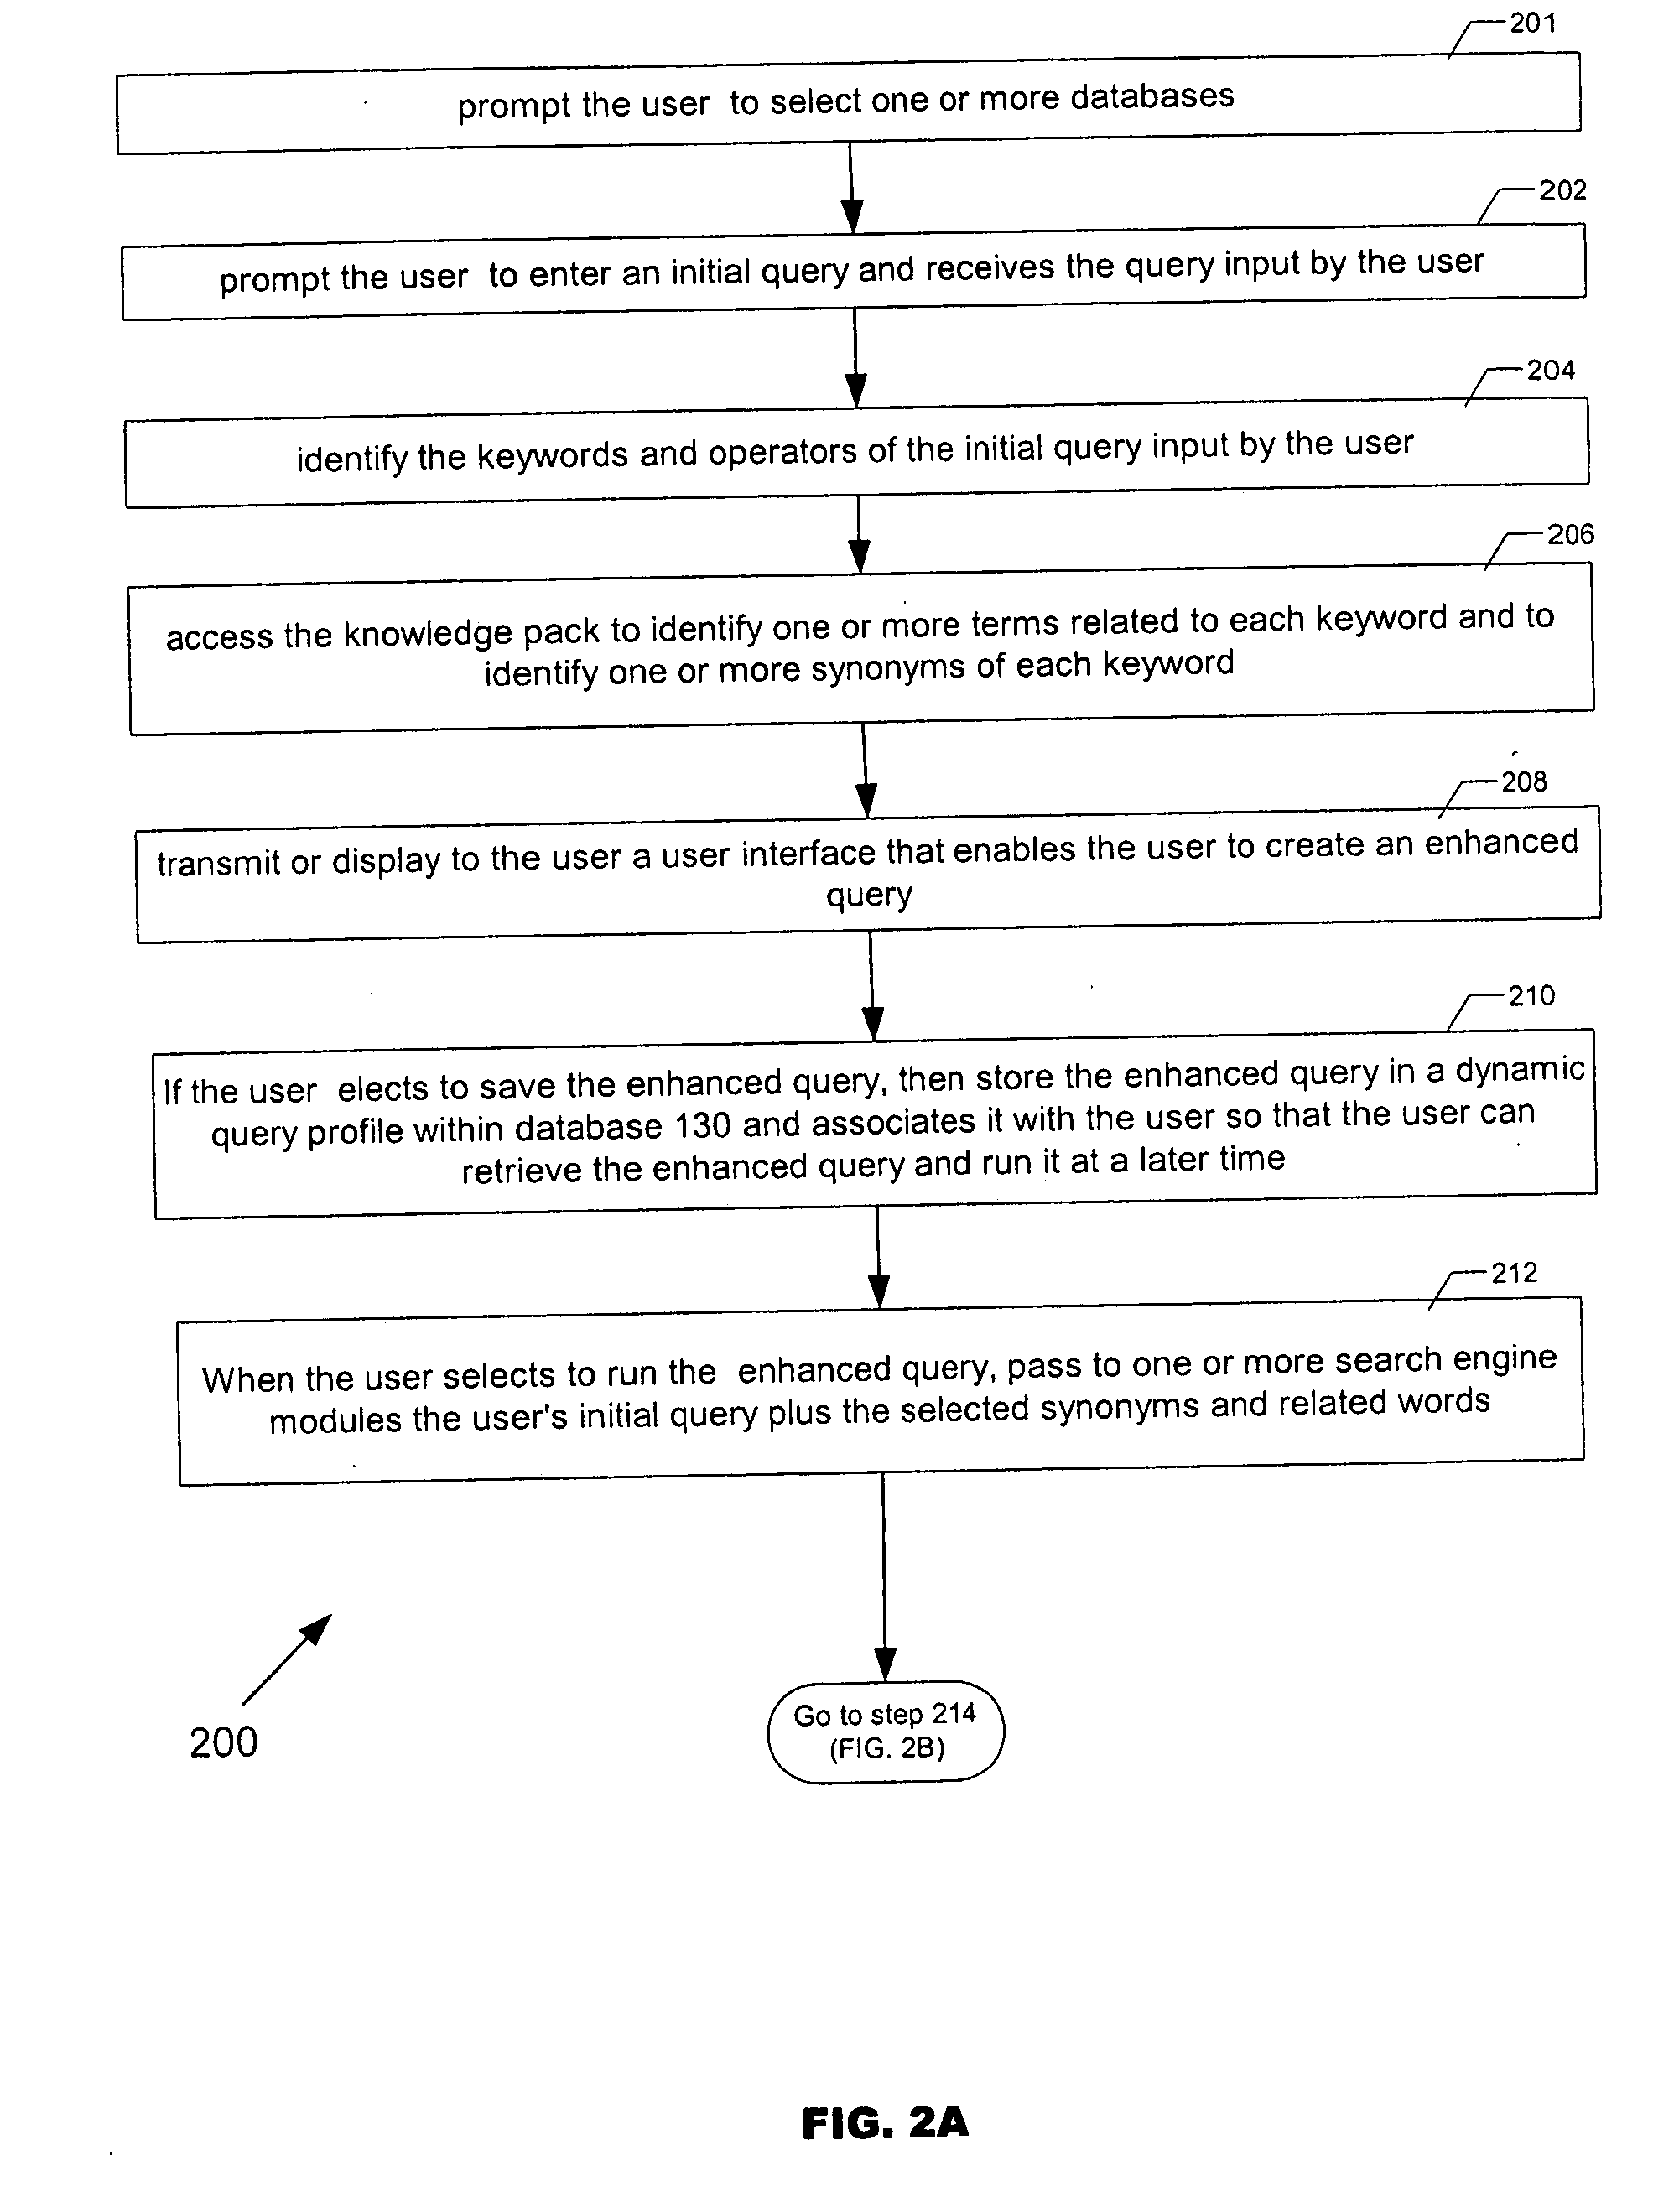 Systems and methods for enabling a user to find information of interest to the user